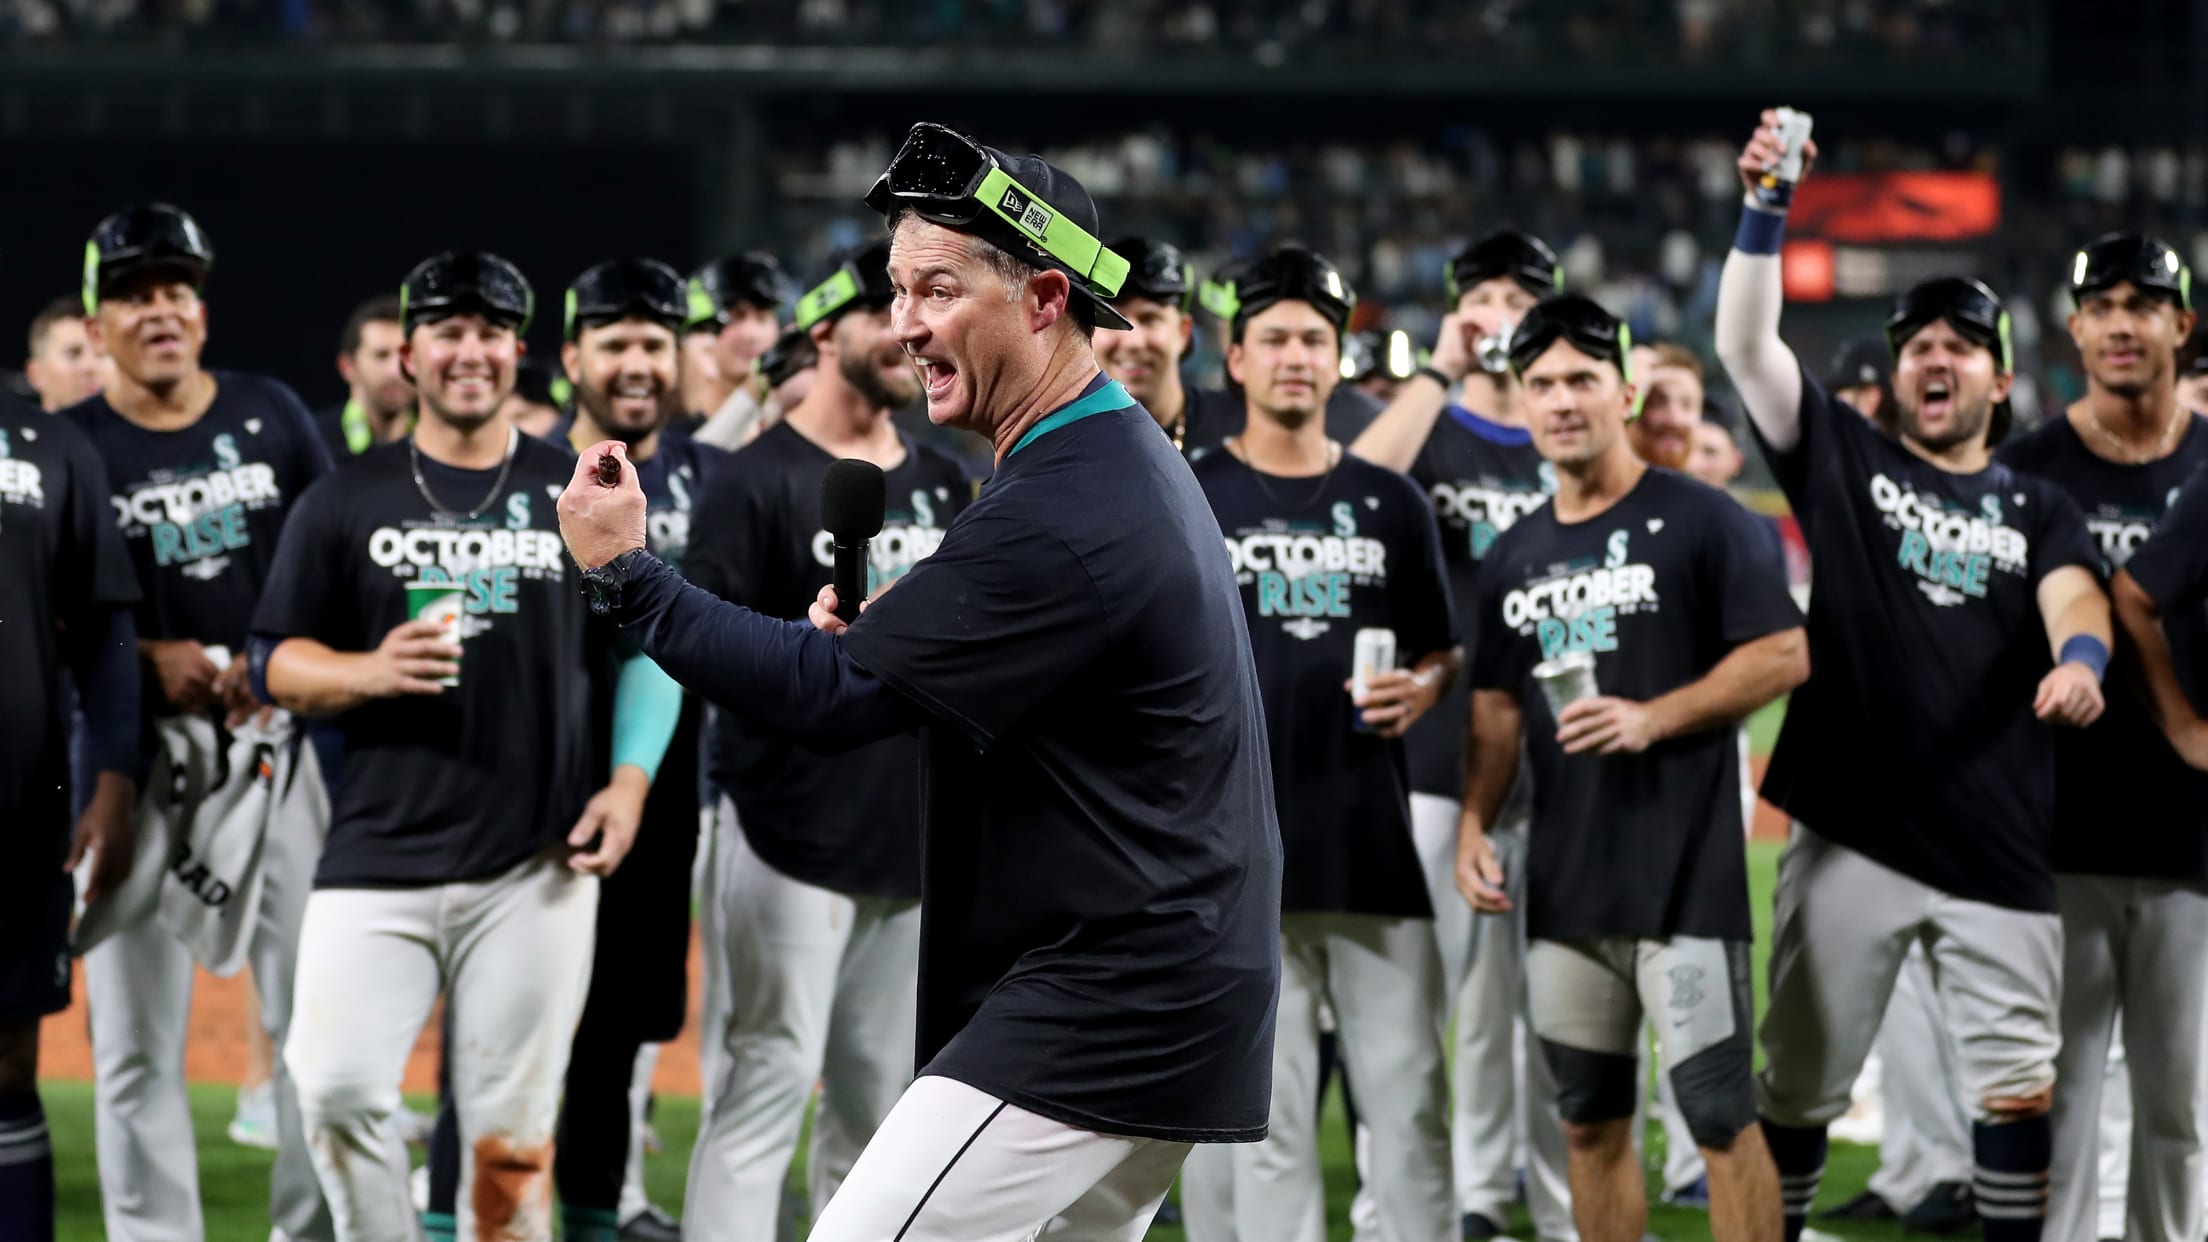 Official Seattle mariners 2022 al west october rise postseason T